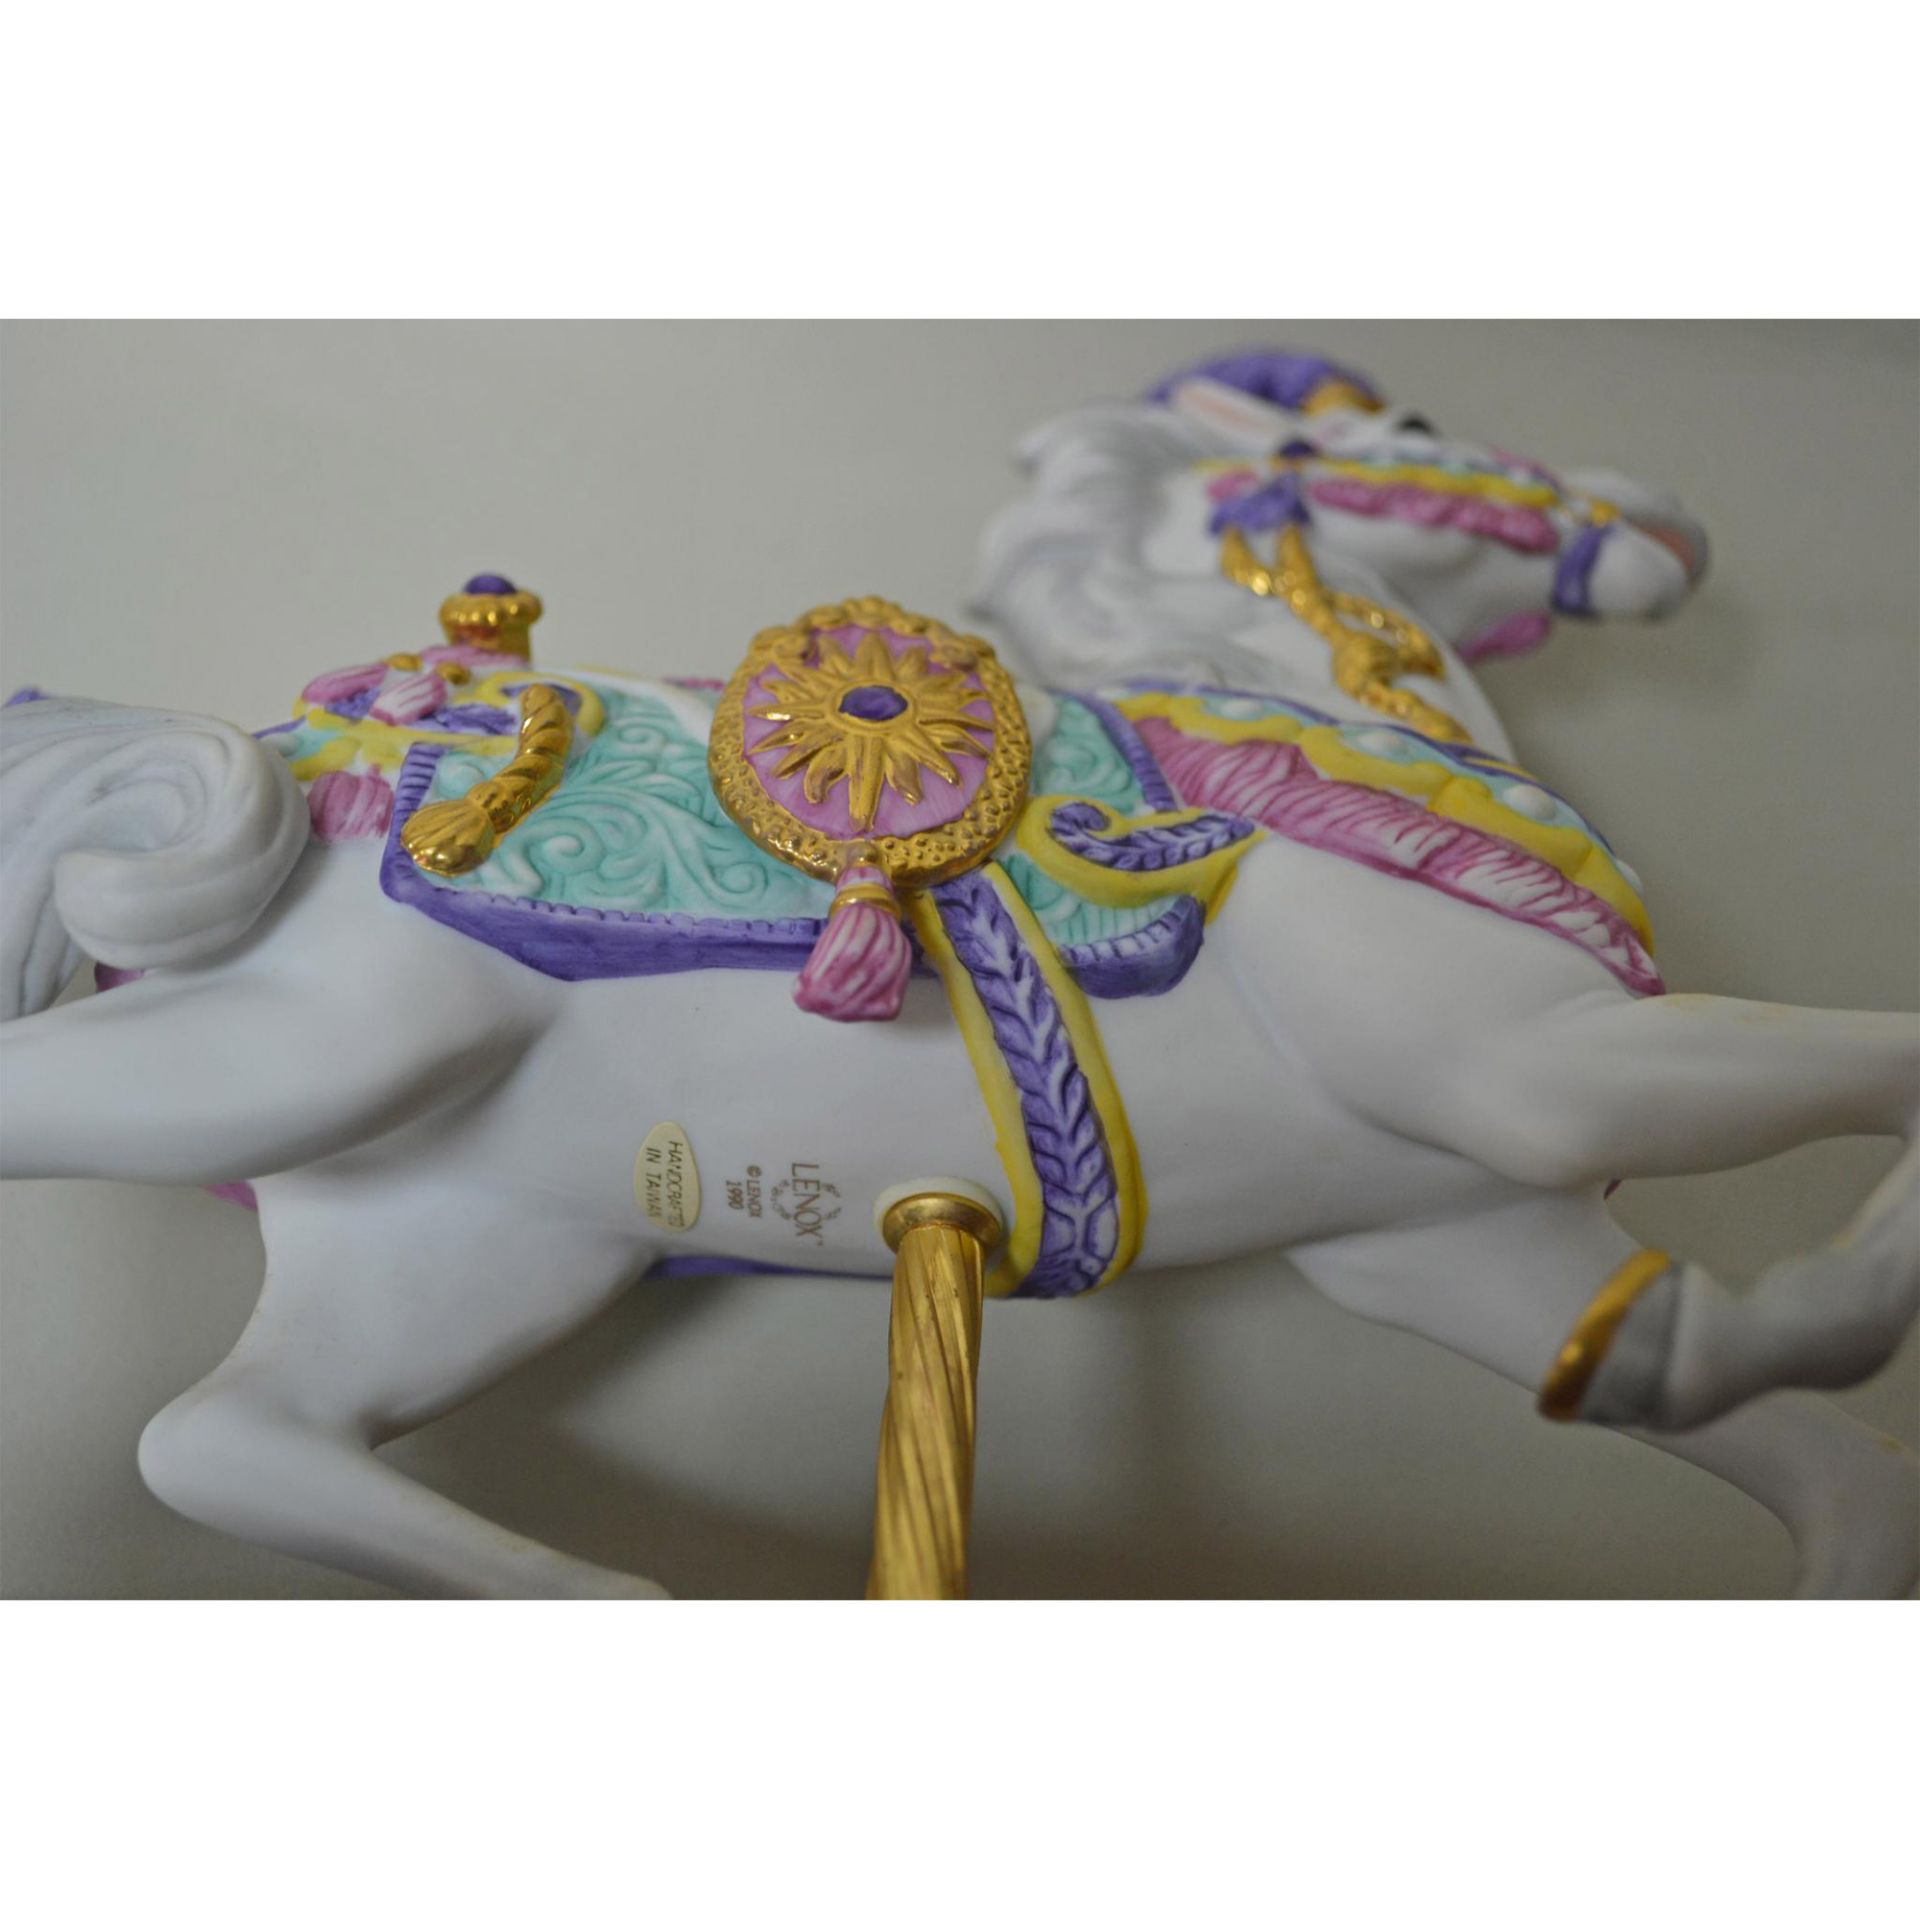 Lenox Vintage 1990 Carousel Charger Horse Figurine - Image 4 of 4